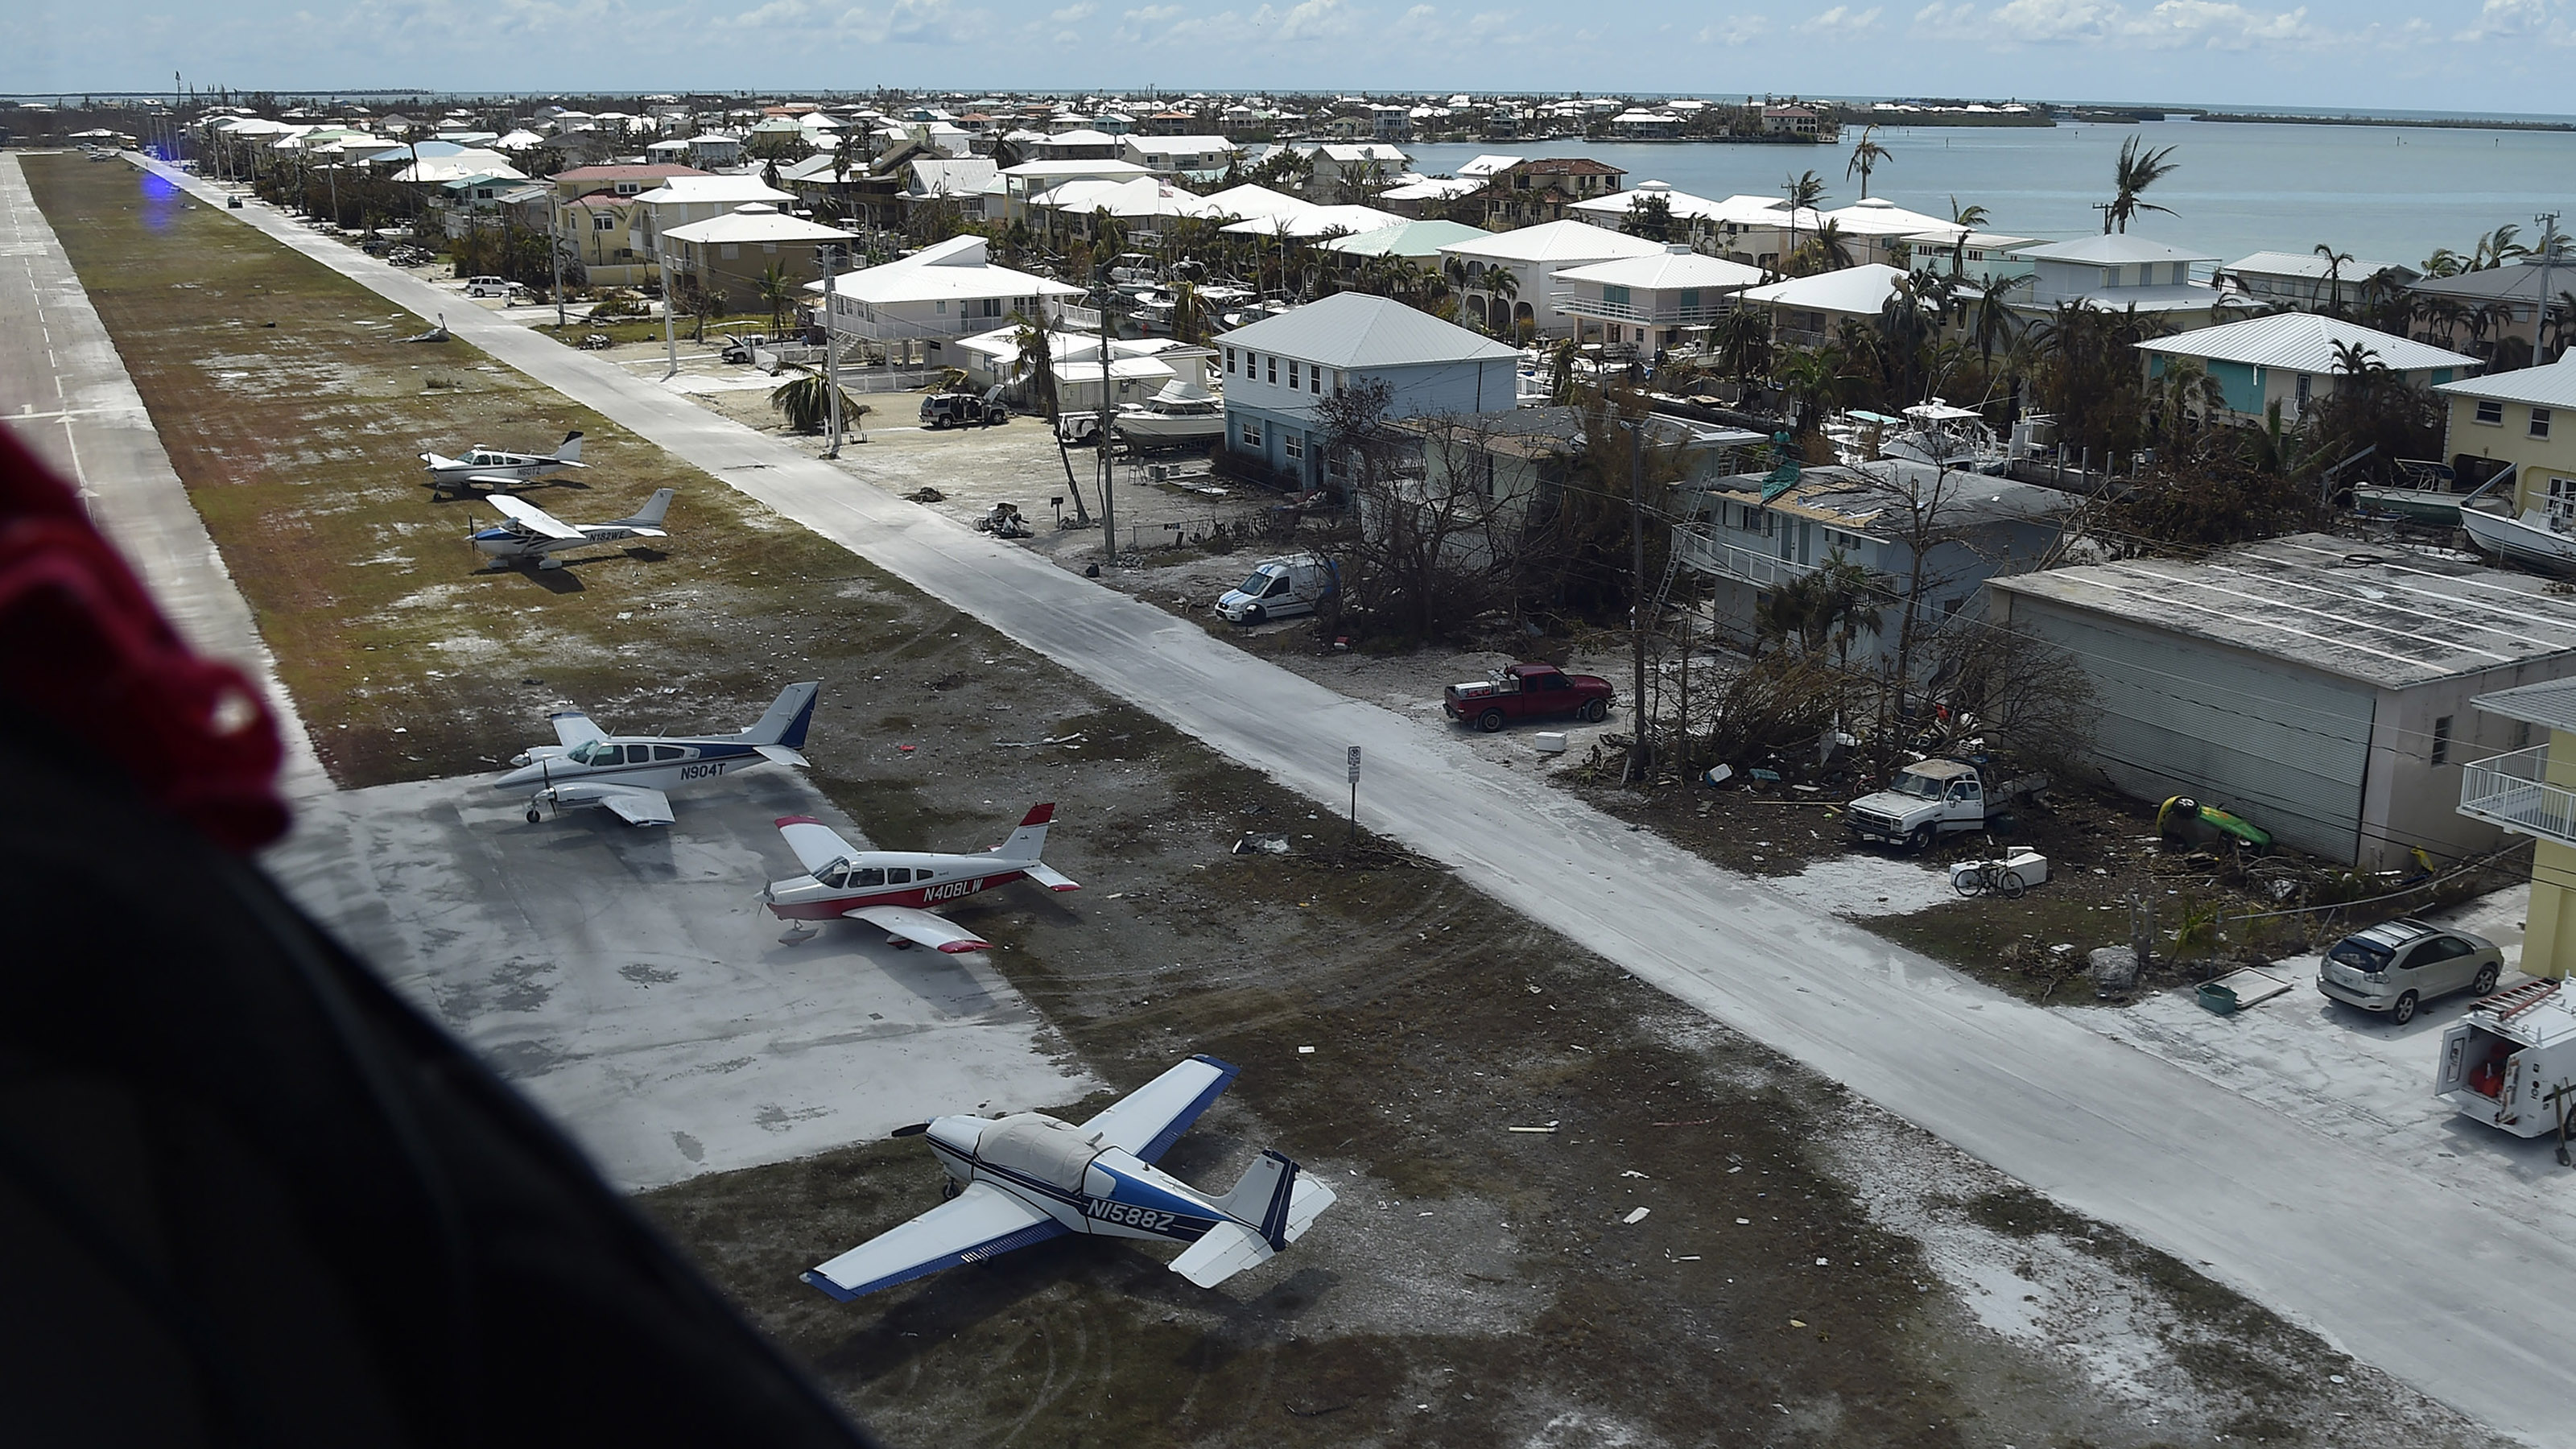 Florida's Summerland Key Cove Airport was a critical key in relief efforts in September in the wake of Hurricane Irma. Photo by David Tulis.